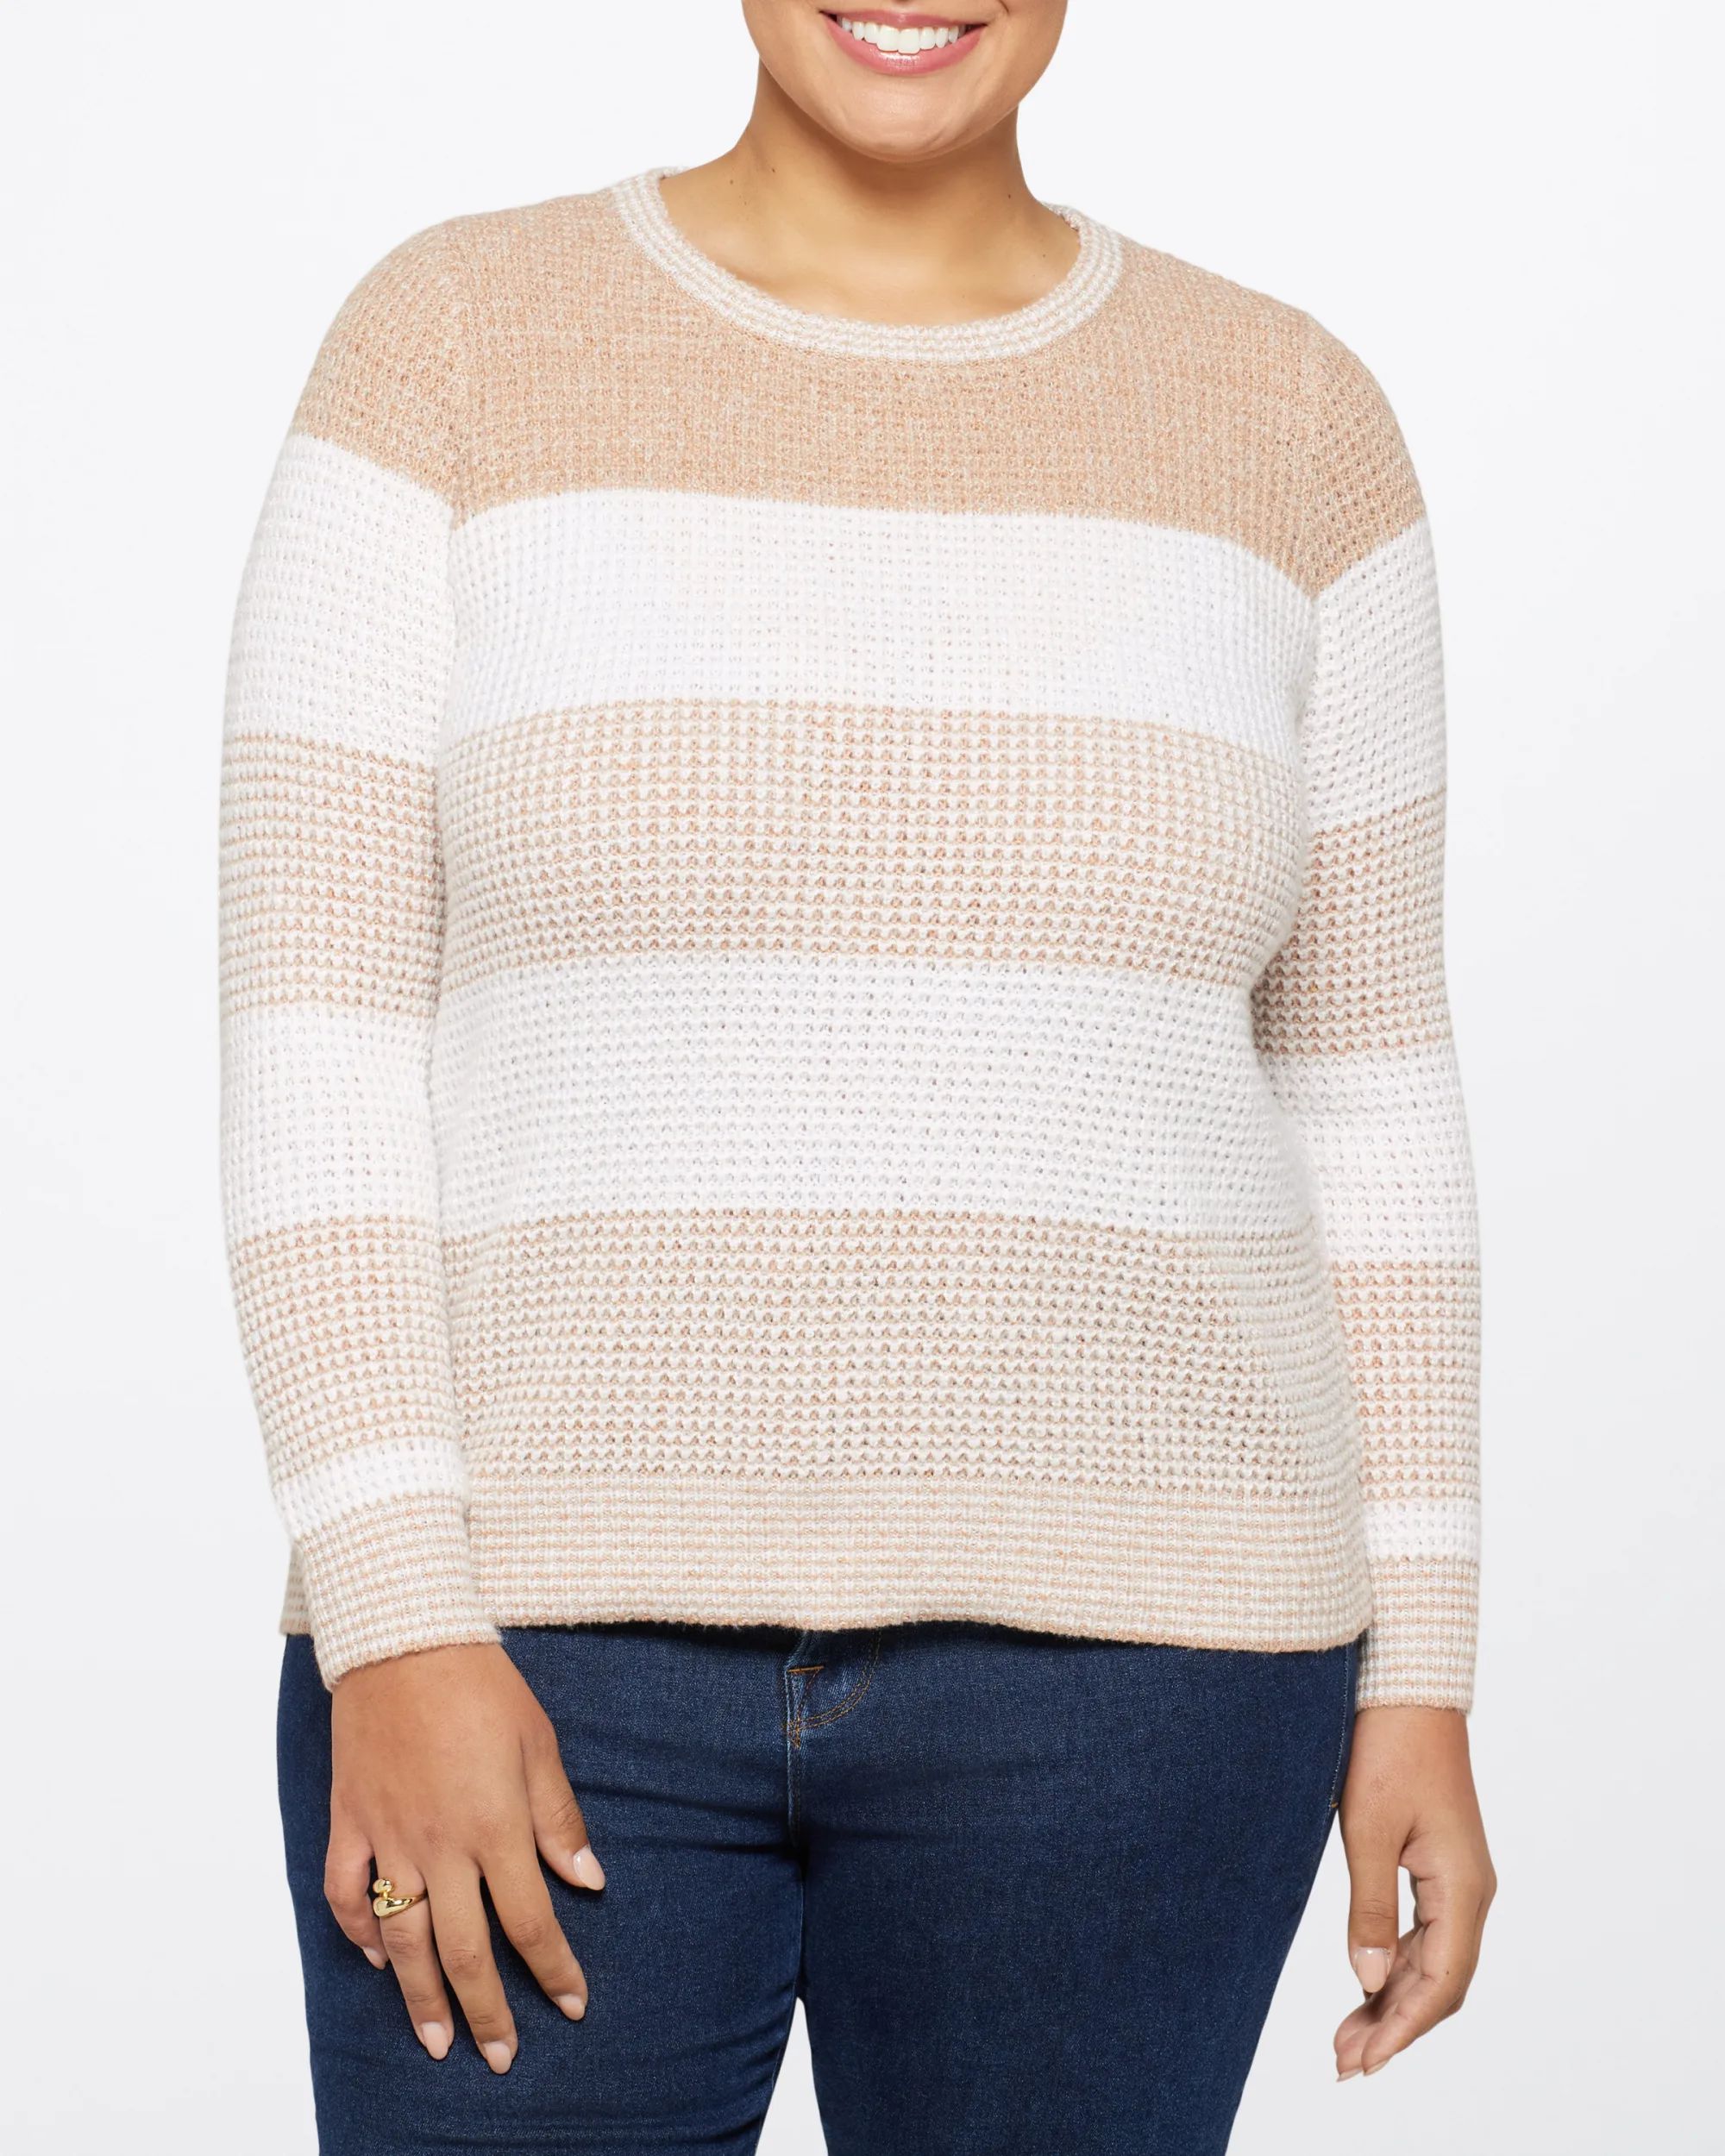 Alicia Textured Long Sleeve Sweater | Stitch Fix